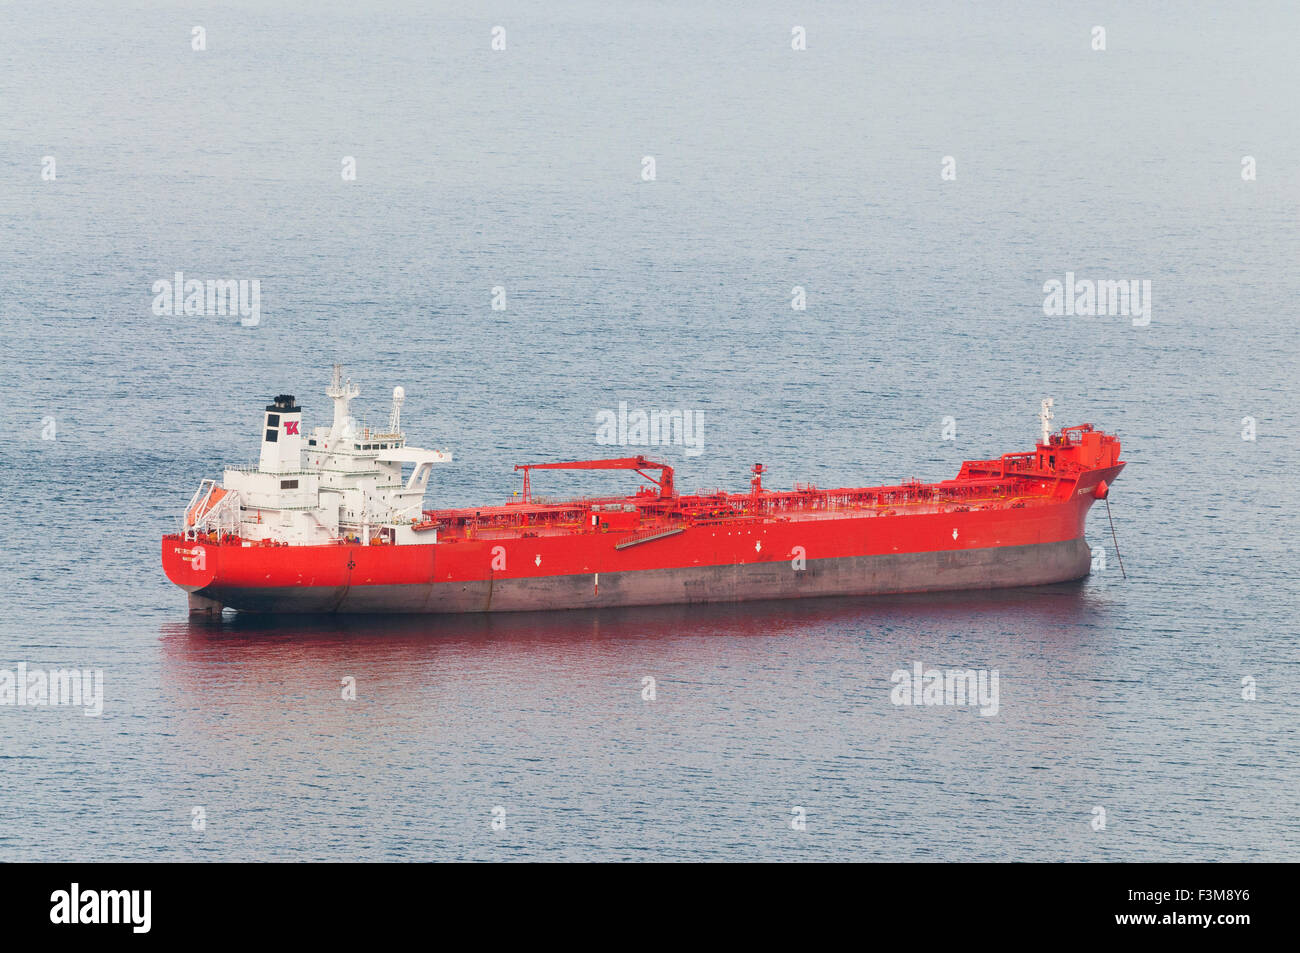 Oil products tanker petronordic at sea Stock Photo